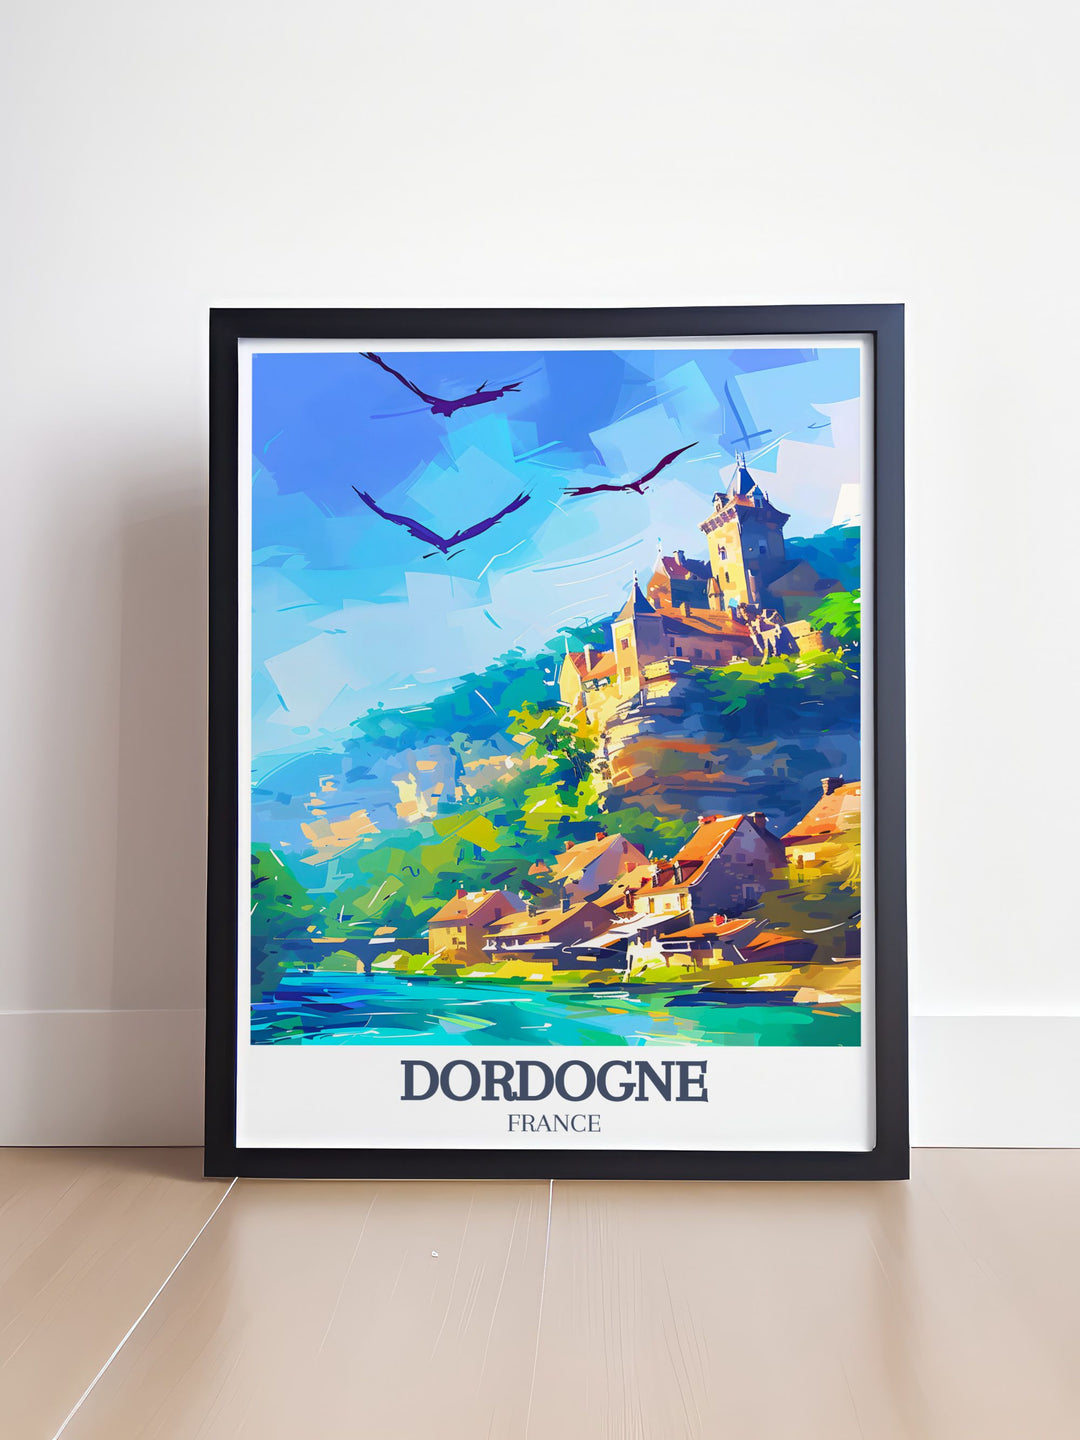 High quality Dordogne print depicting the iconic Chateau de Beynac and La Roque Gageac an elegant piece of France wall decor for your home or office